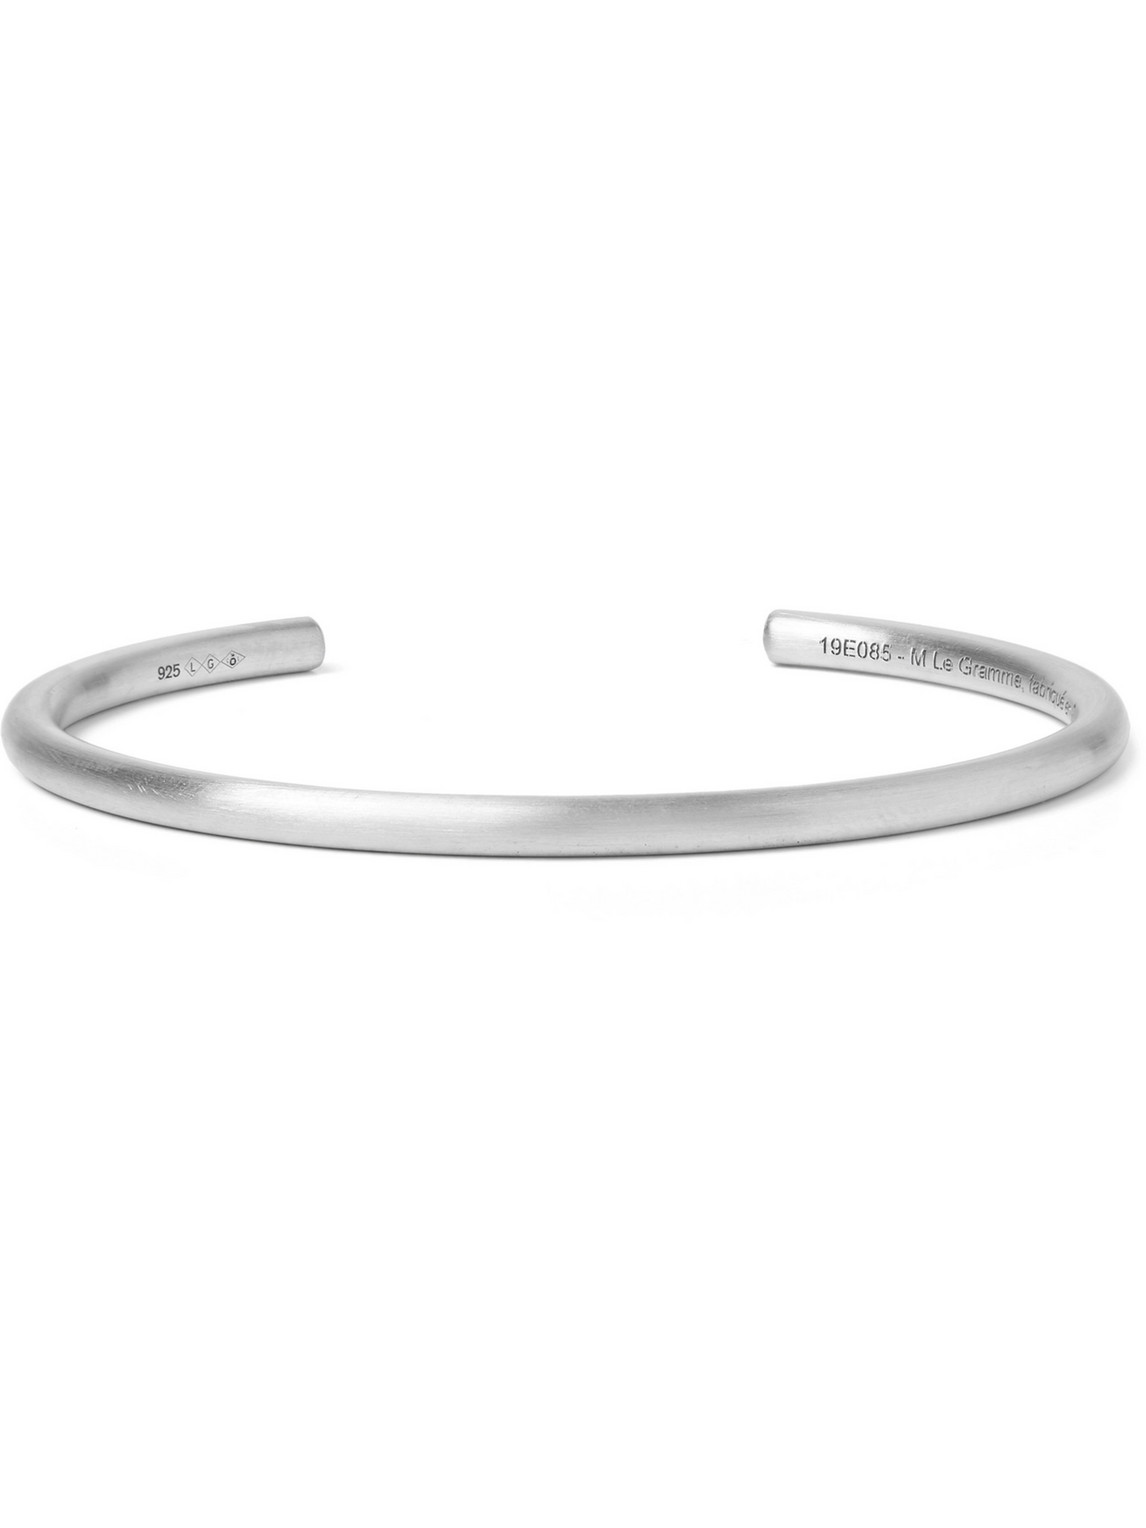 Le Gramme Le 15 Brushed Sterling Silver Cuff